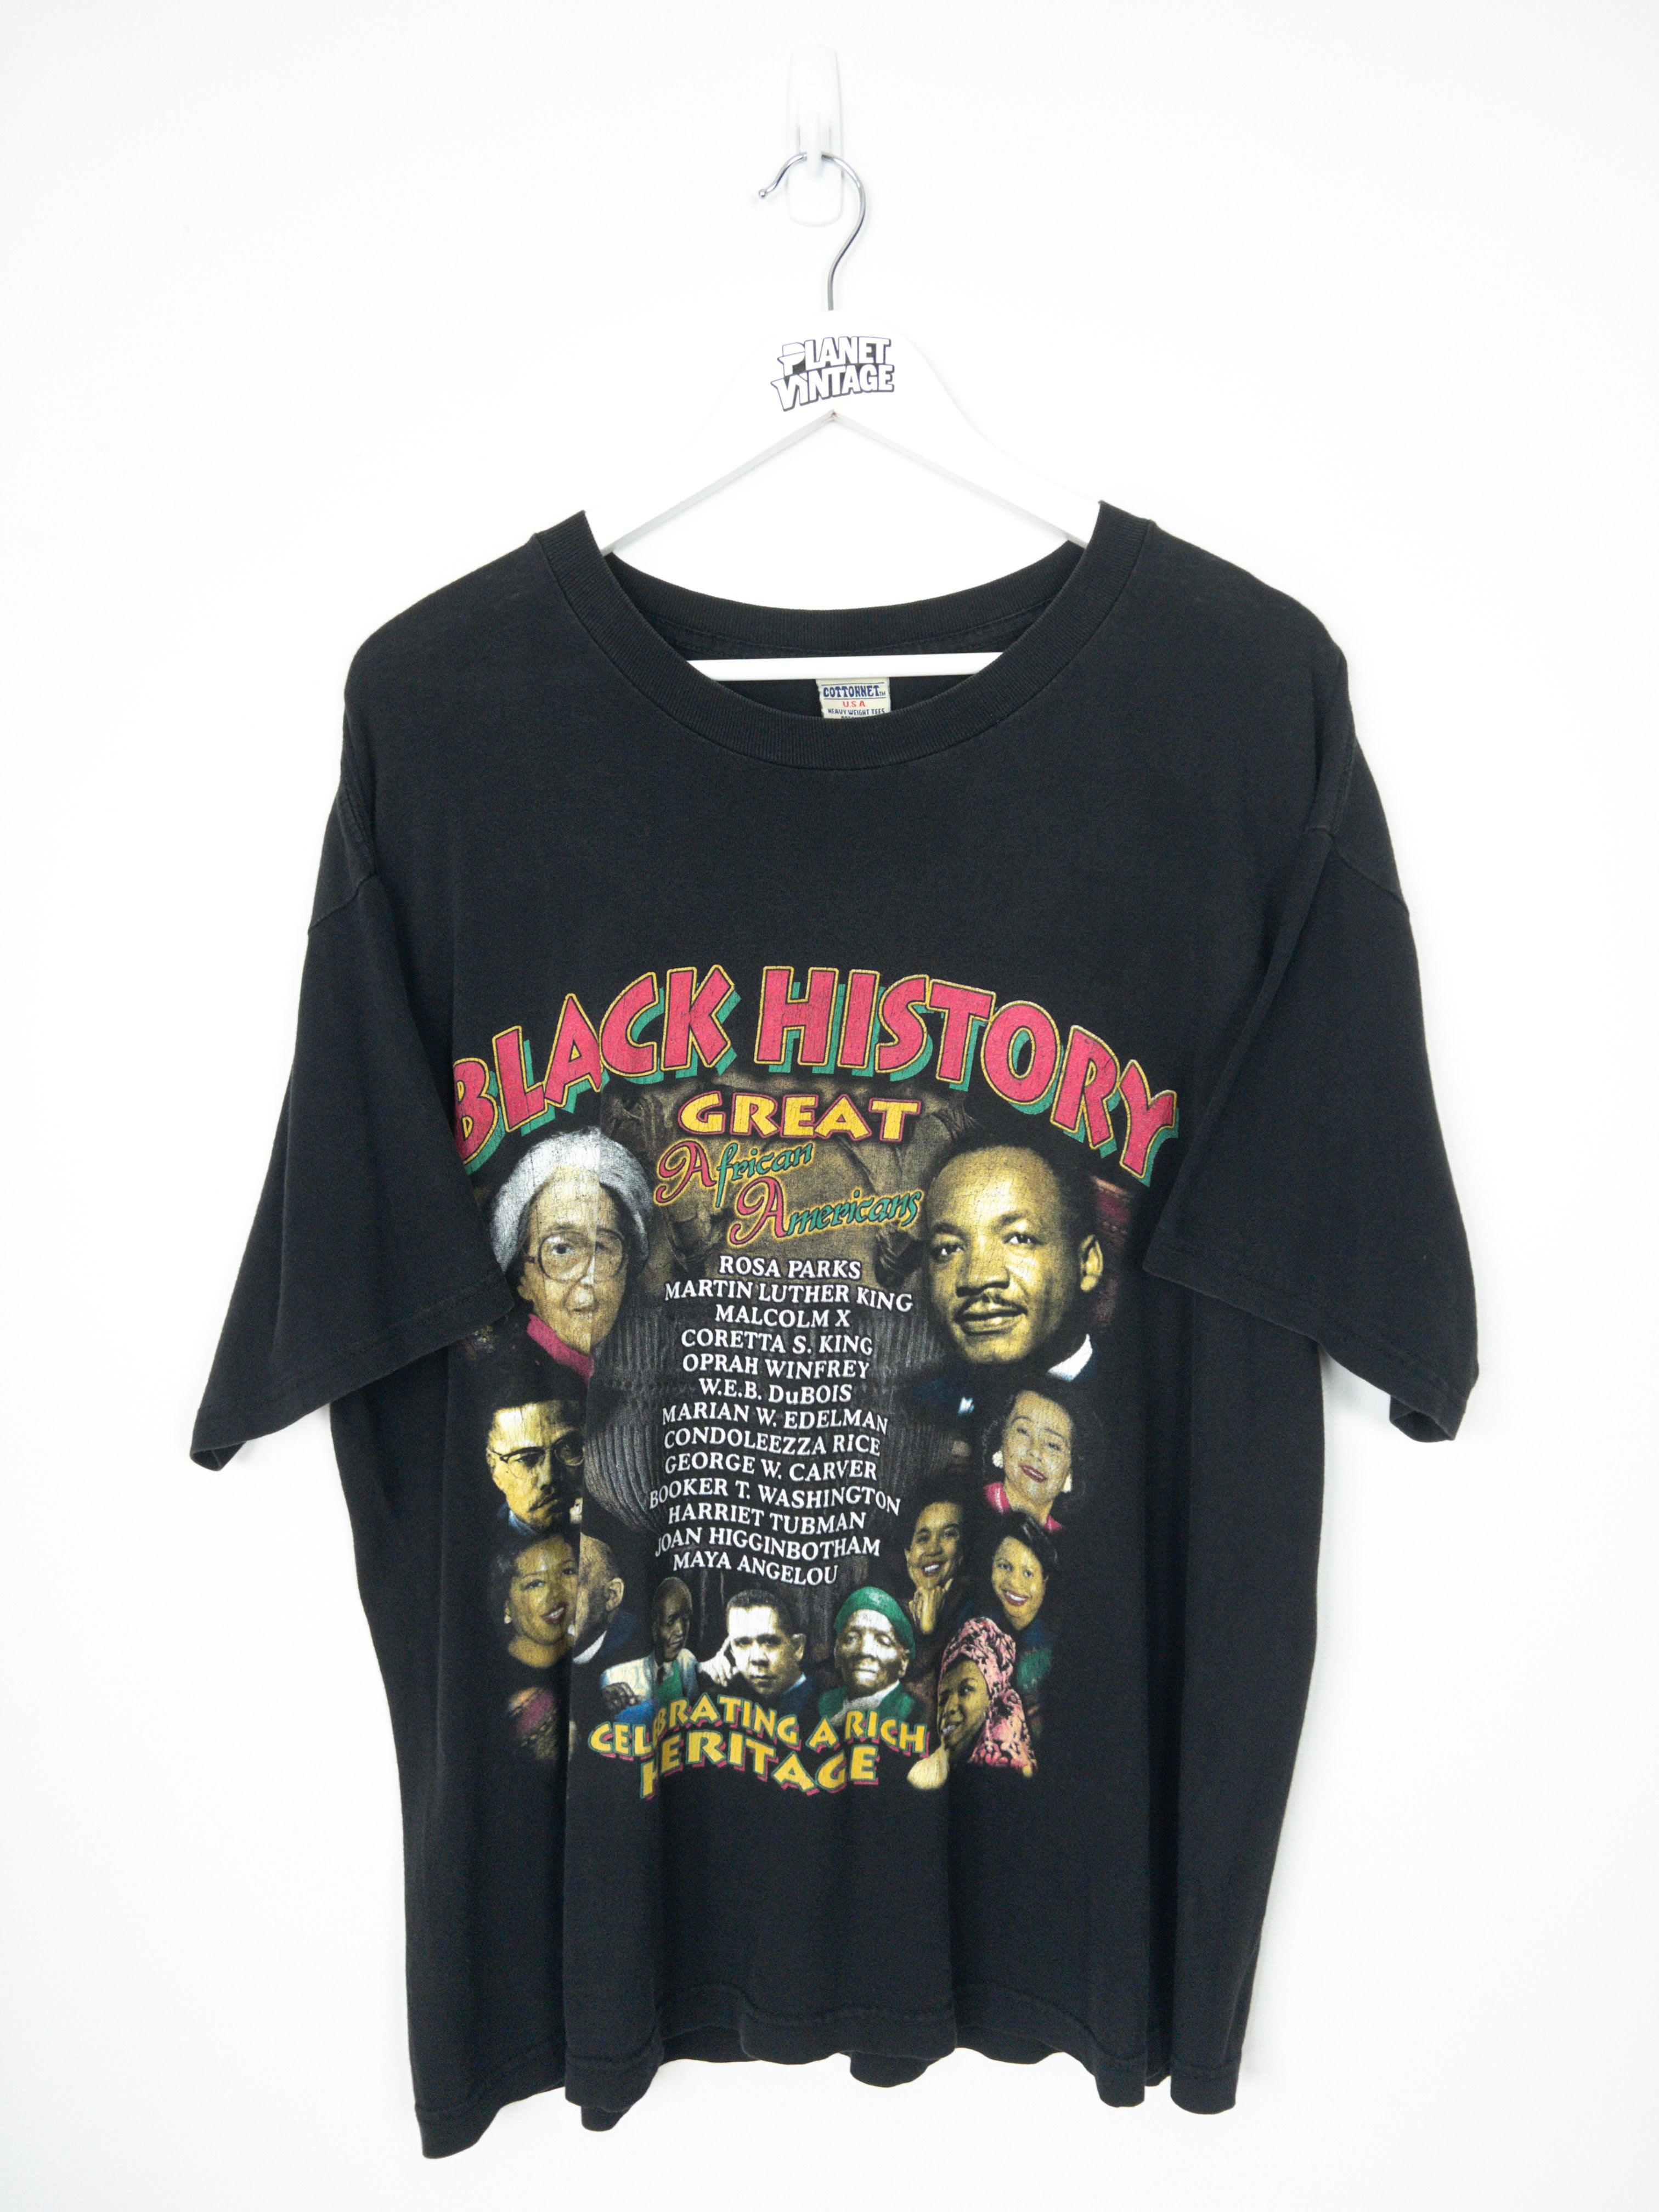 Black History Greats '90s Tee (XL) - Planet Vintage Store